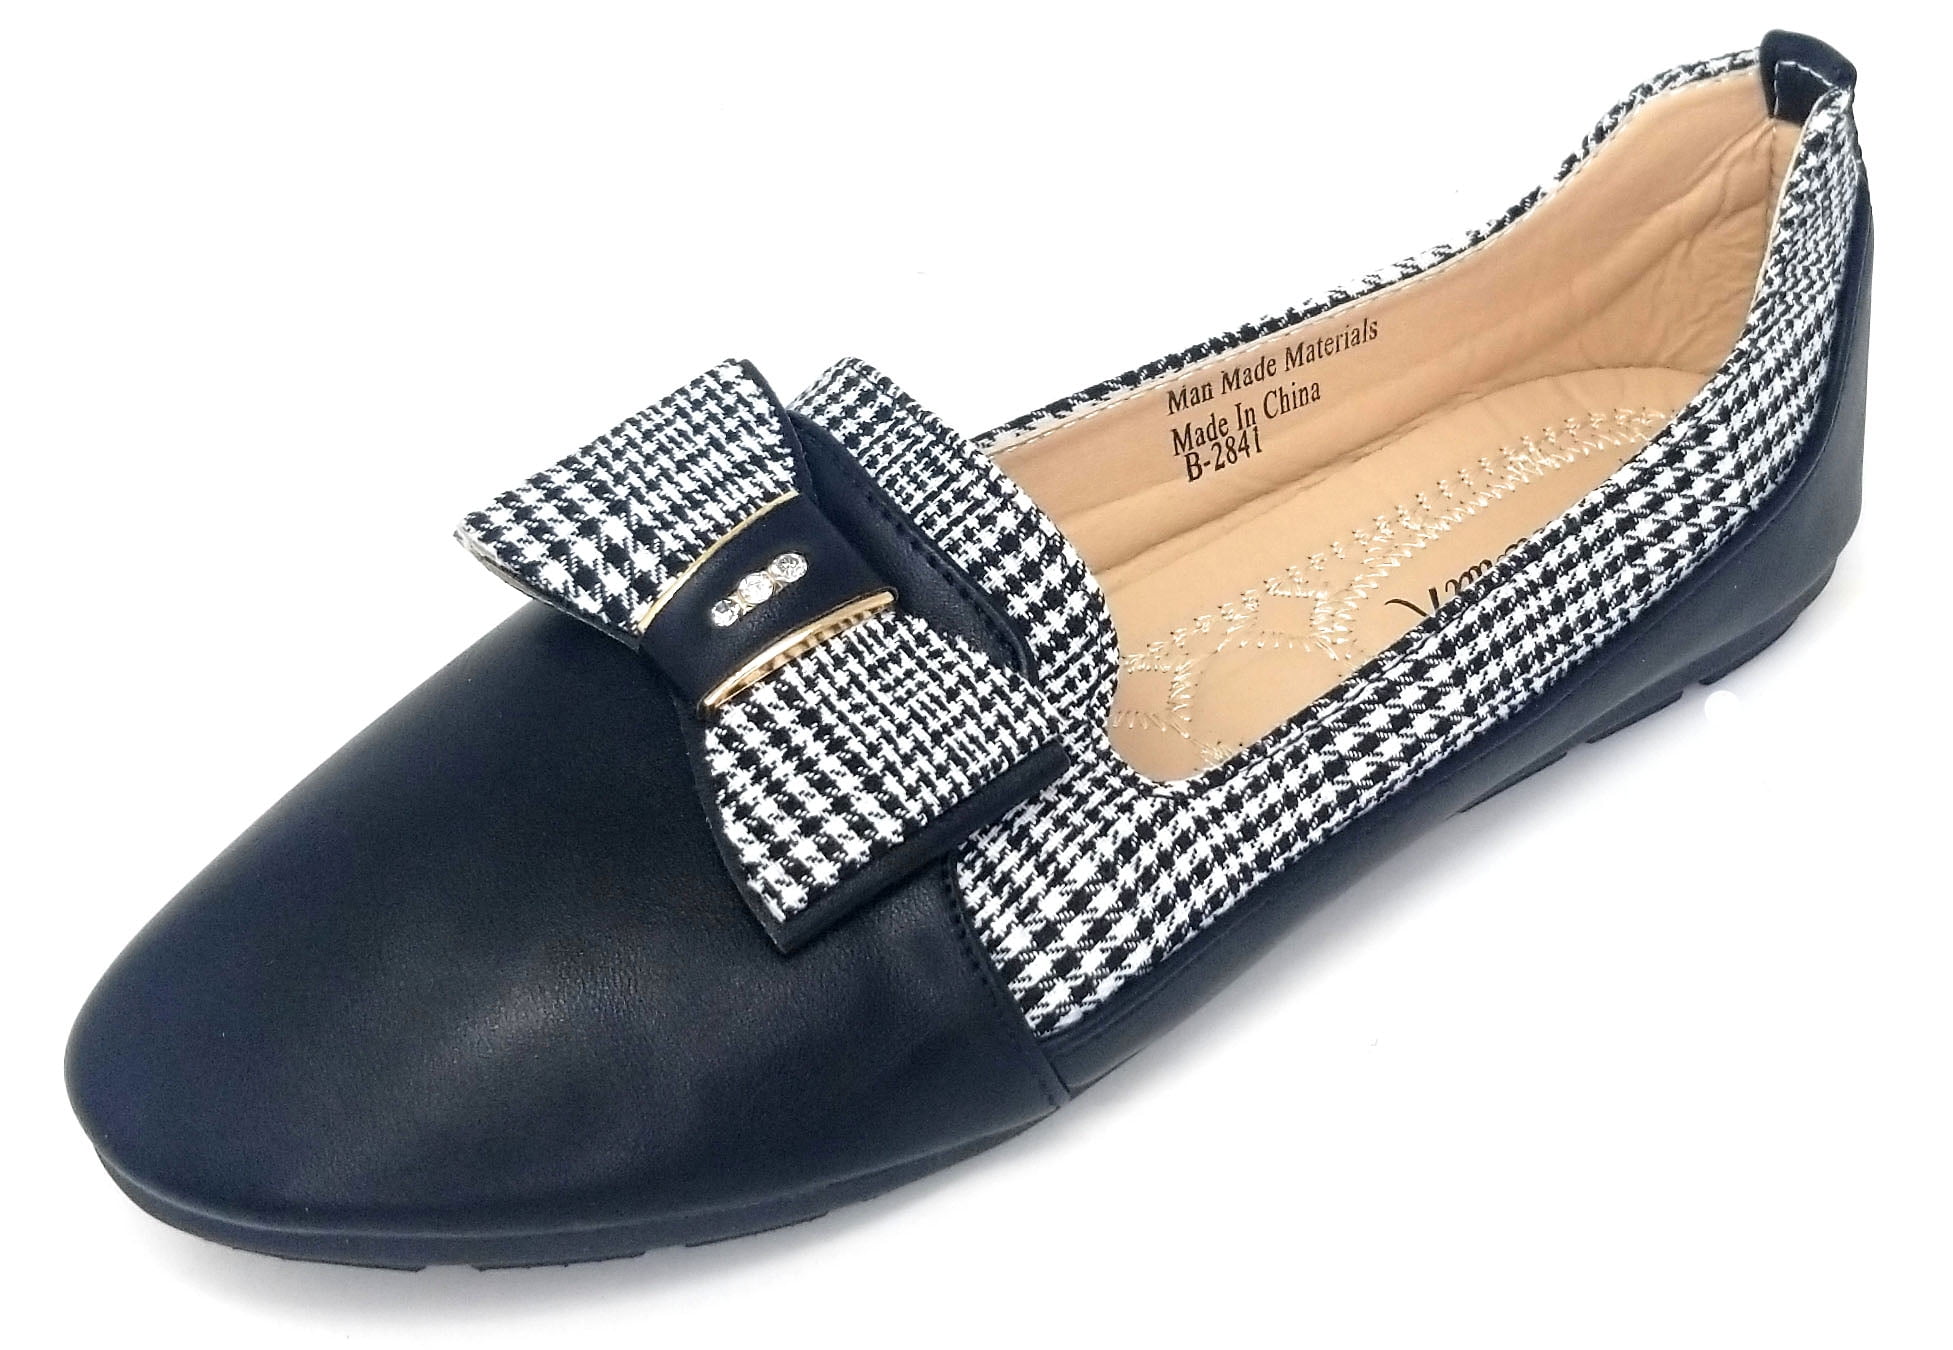 Retro Womens Japanese bowknot Slip on Loafers Round Toe Casual Flats Shoes new 